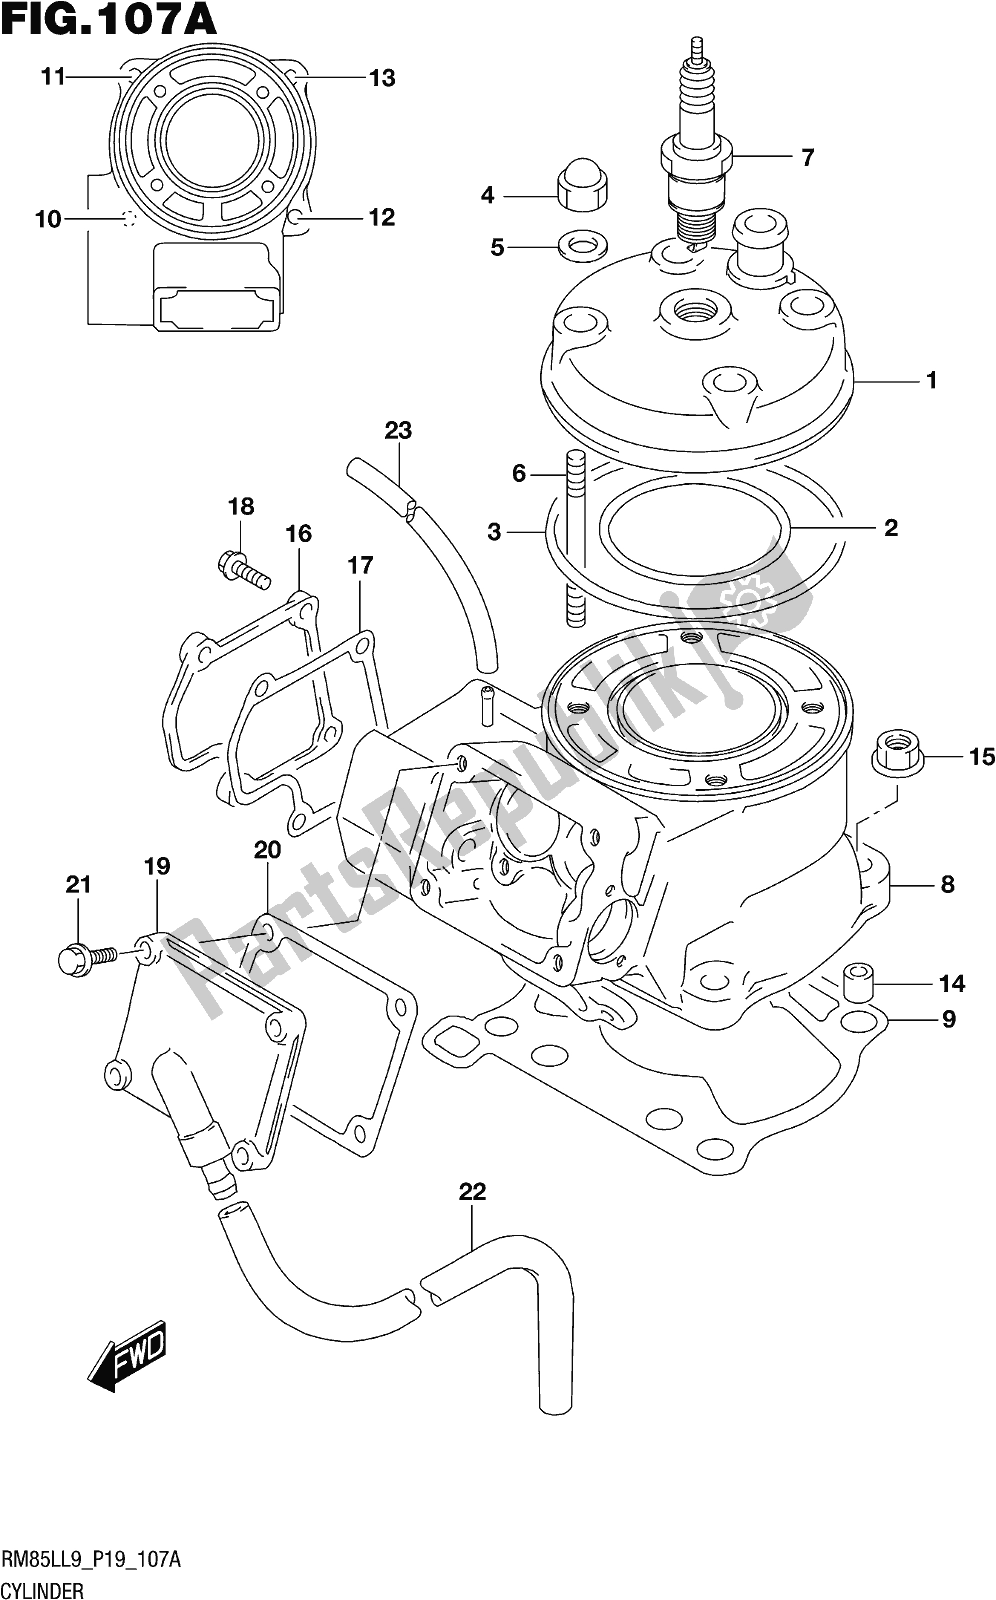 All parts for the Fig. 107a Cylinder of the Suzuki RM 85L 2019